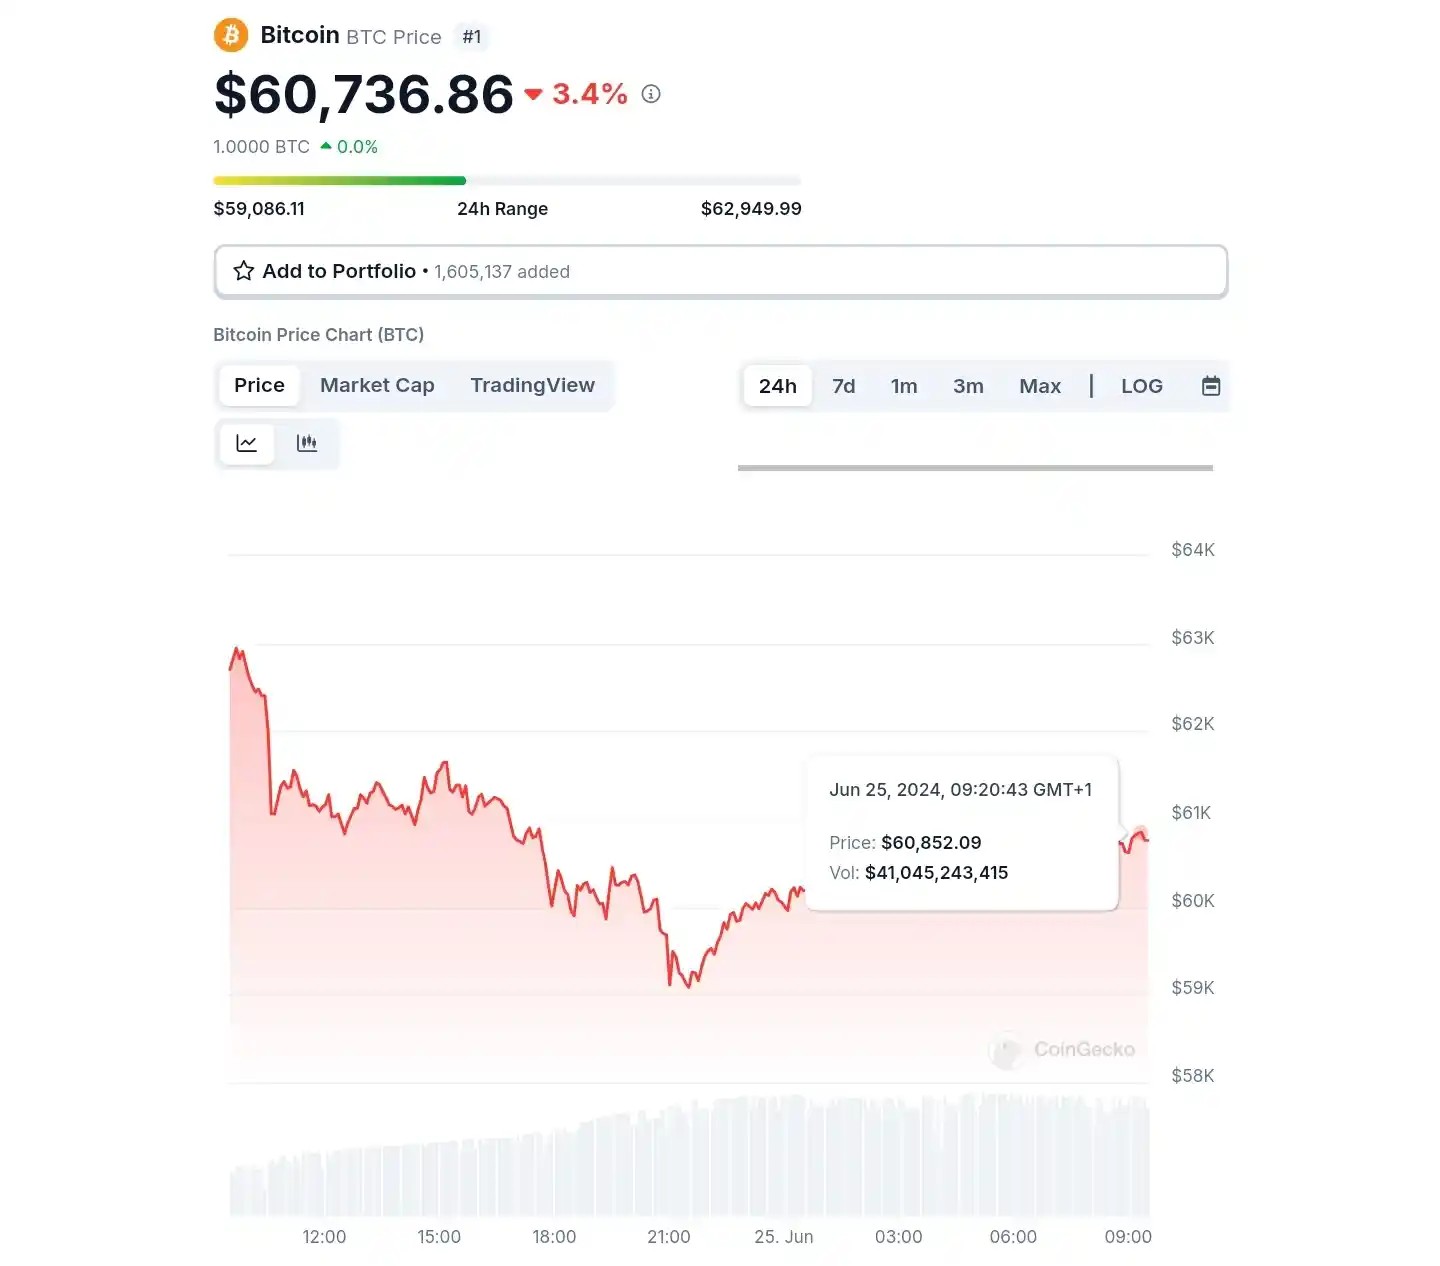 An image showing Bitcoin Price 